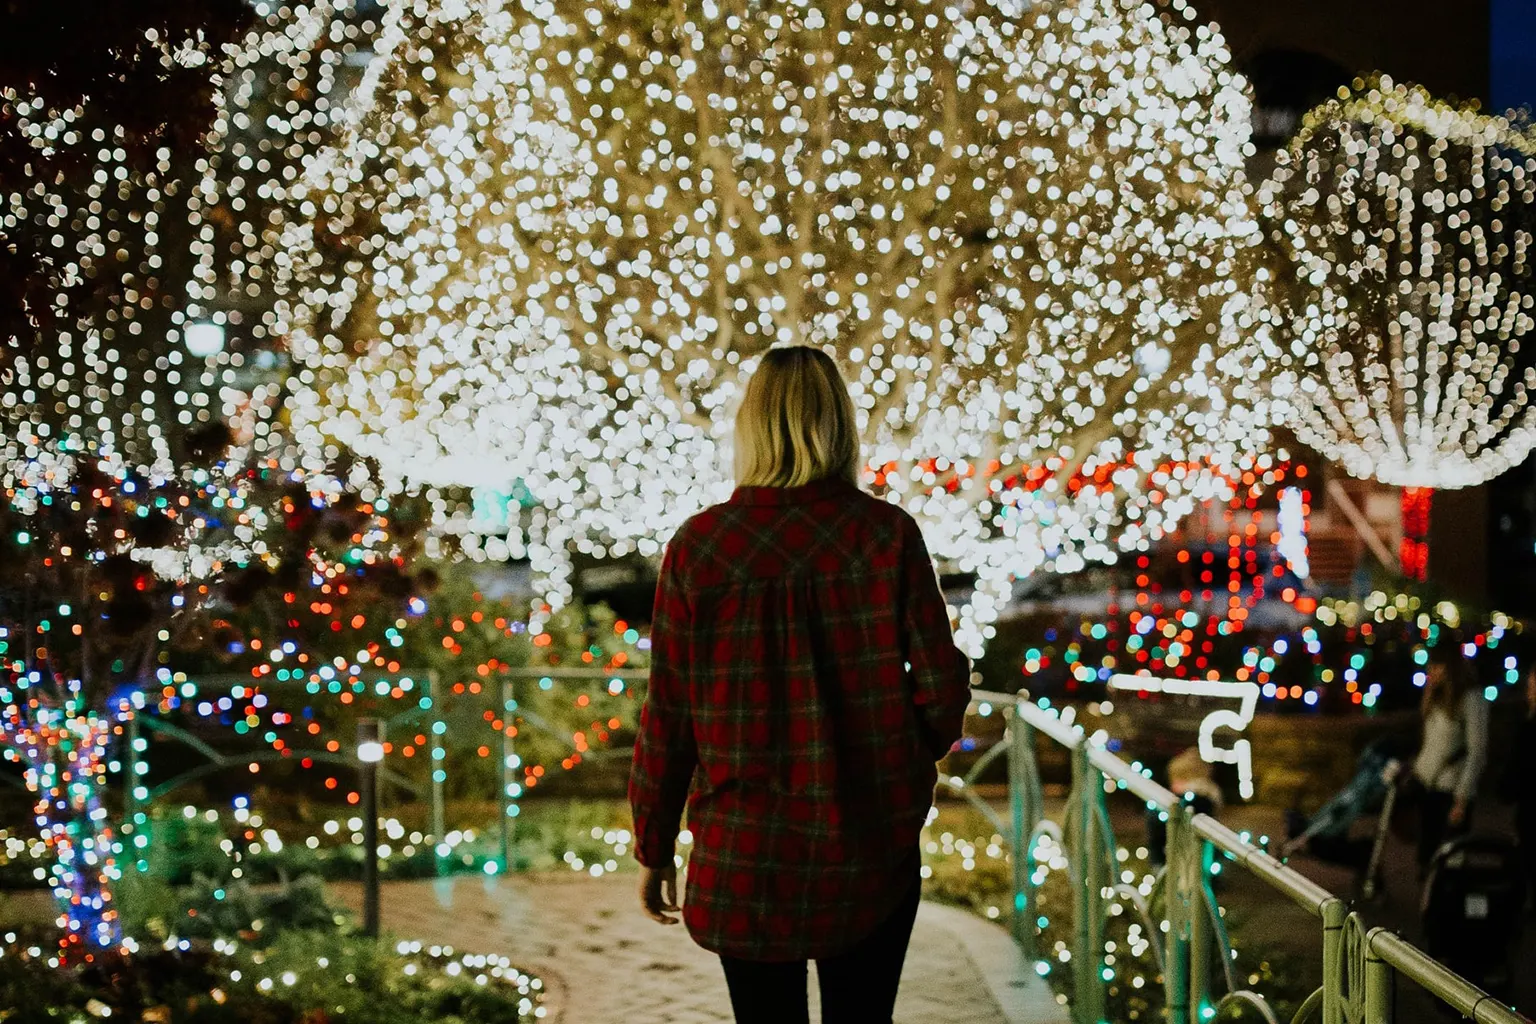 8. December is the Best Time to Visit San Francisco if you want to experience Stunning Light Displays and Festive Holiday Vibes